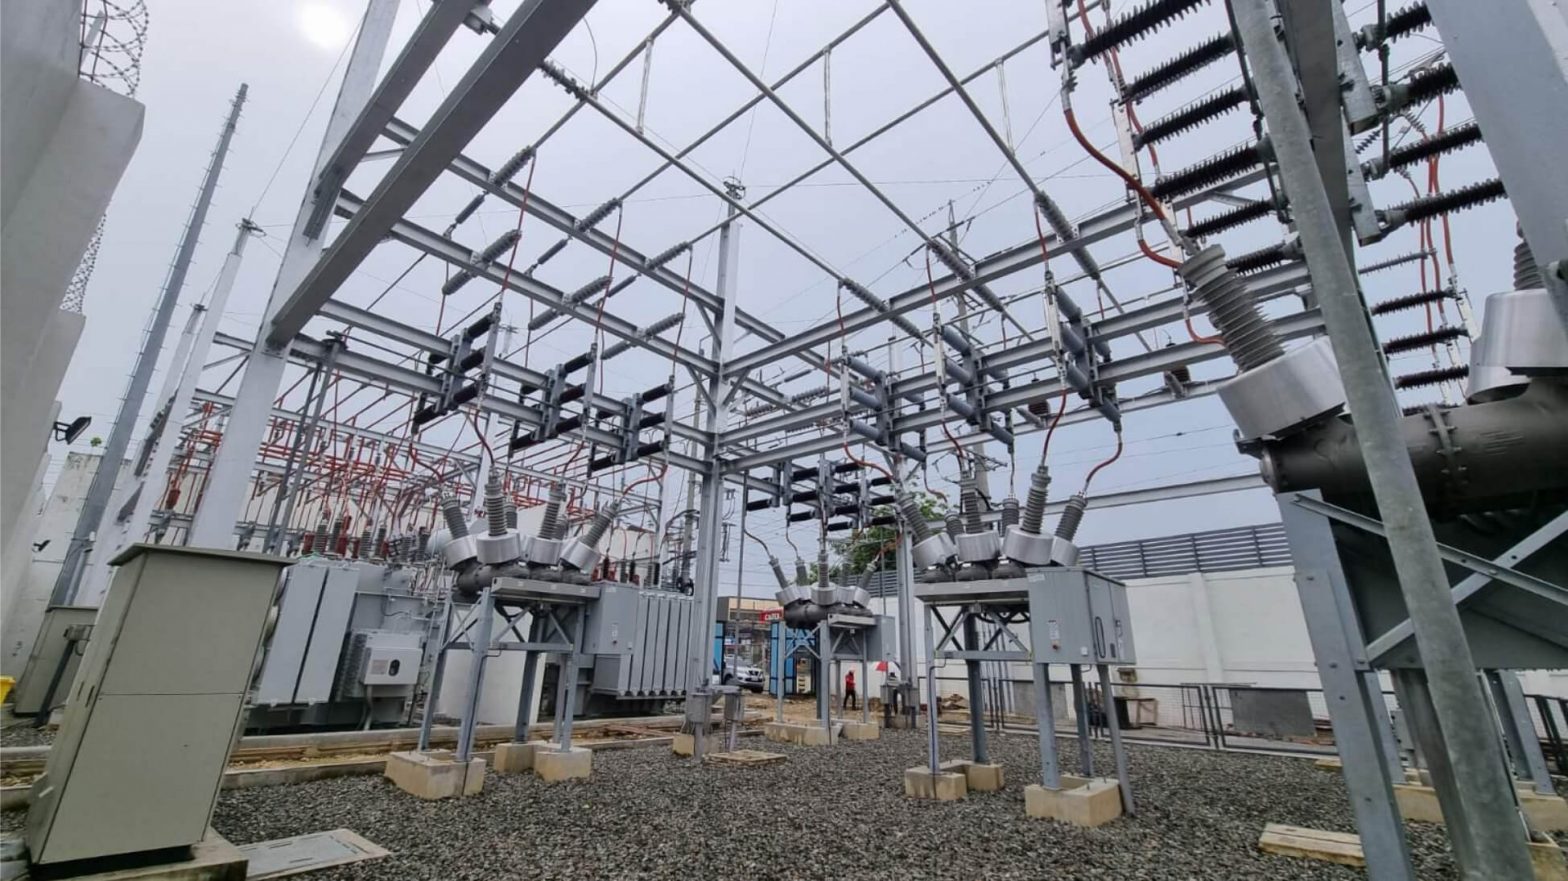 FULLY DIGITAL SUBSTATION. The Visayan Electric Pakna-an substation is the first fully digital substation within its franchise area. Visayan Electric spent P102 million for the project, of which P29 million went into the protection and control systems adapting the IEC 61850, an international transmission protocol standard for communication in medium- and high-voltage electric substations.